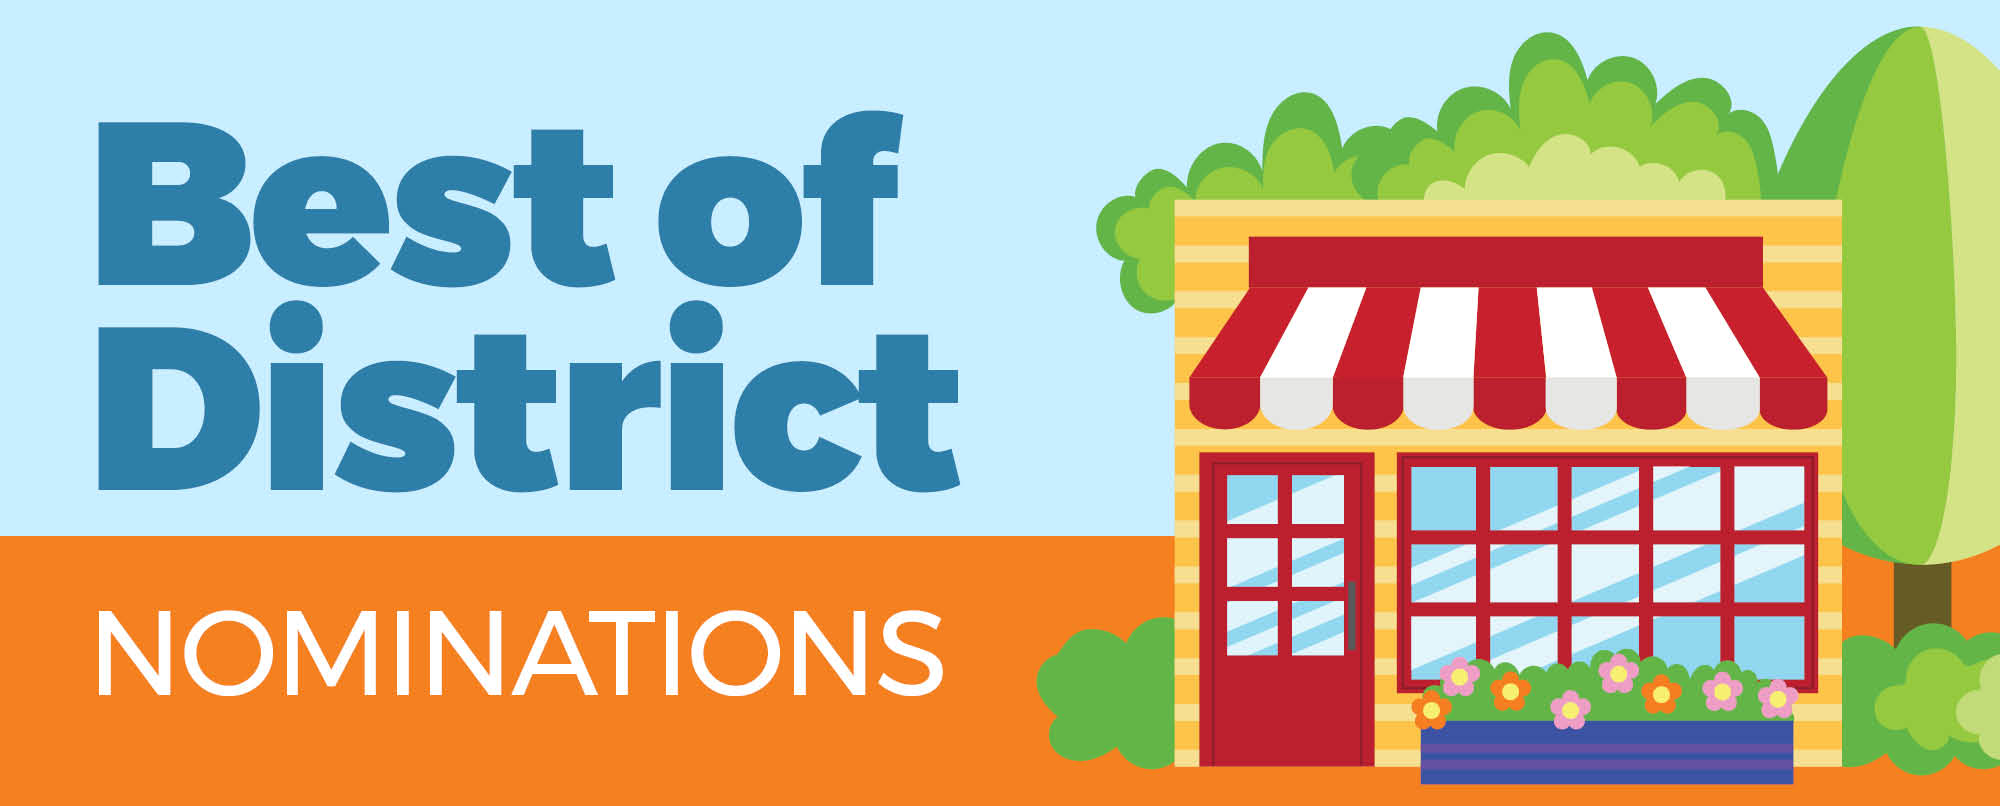 Best of the District Nominations